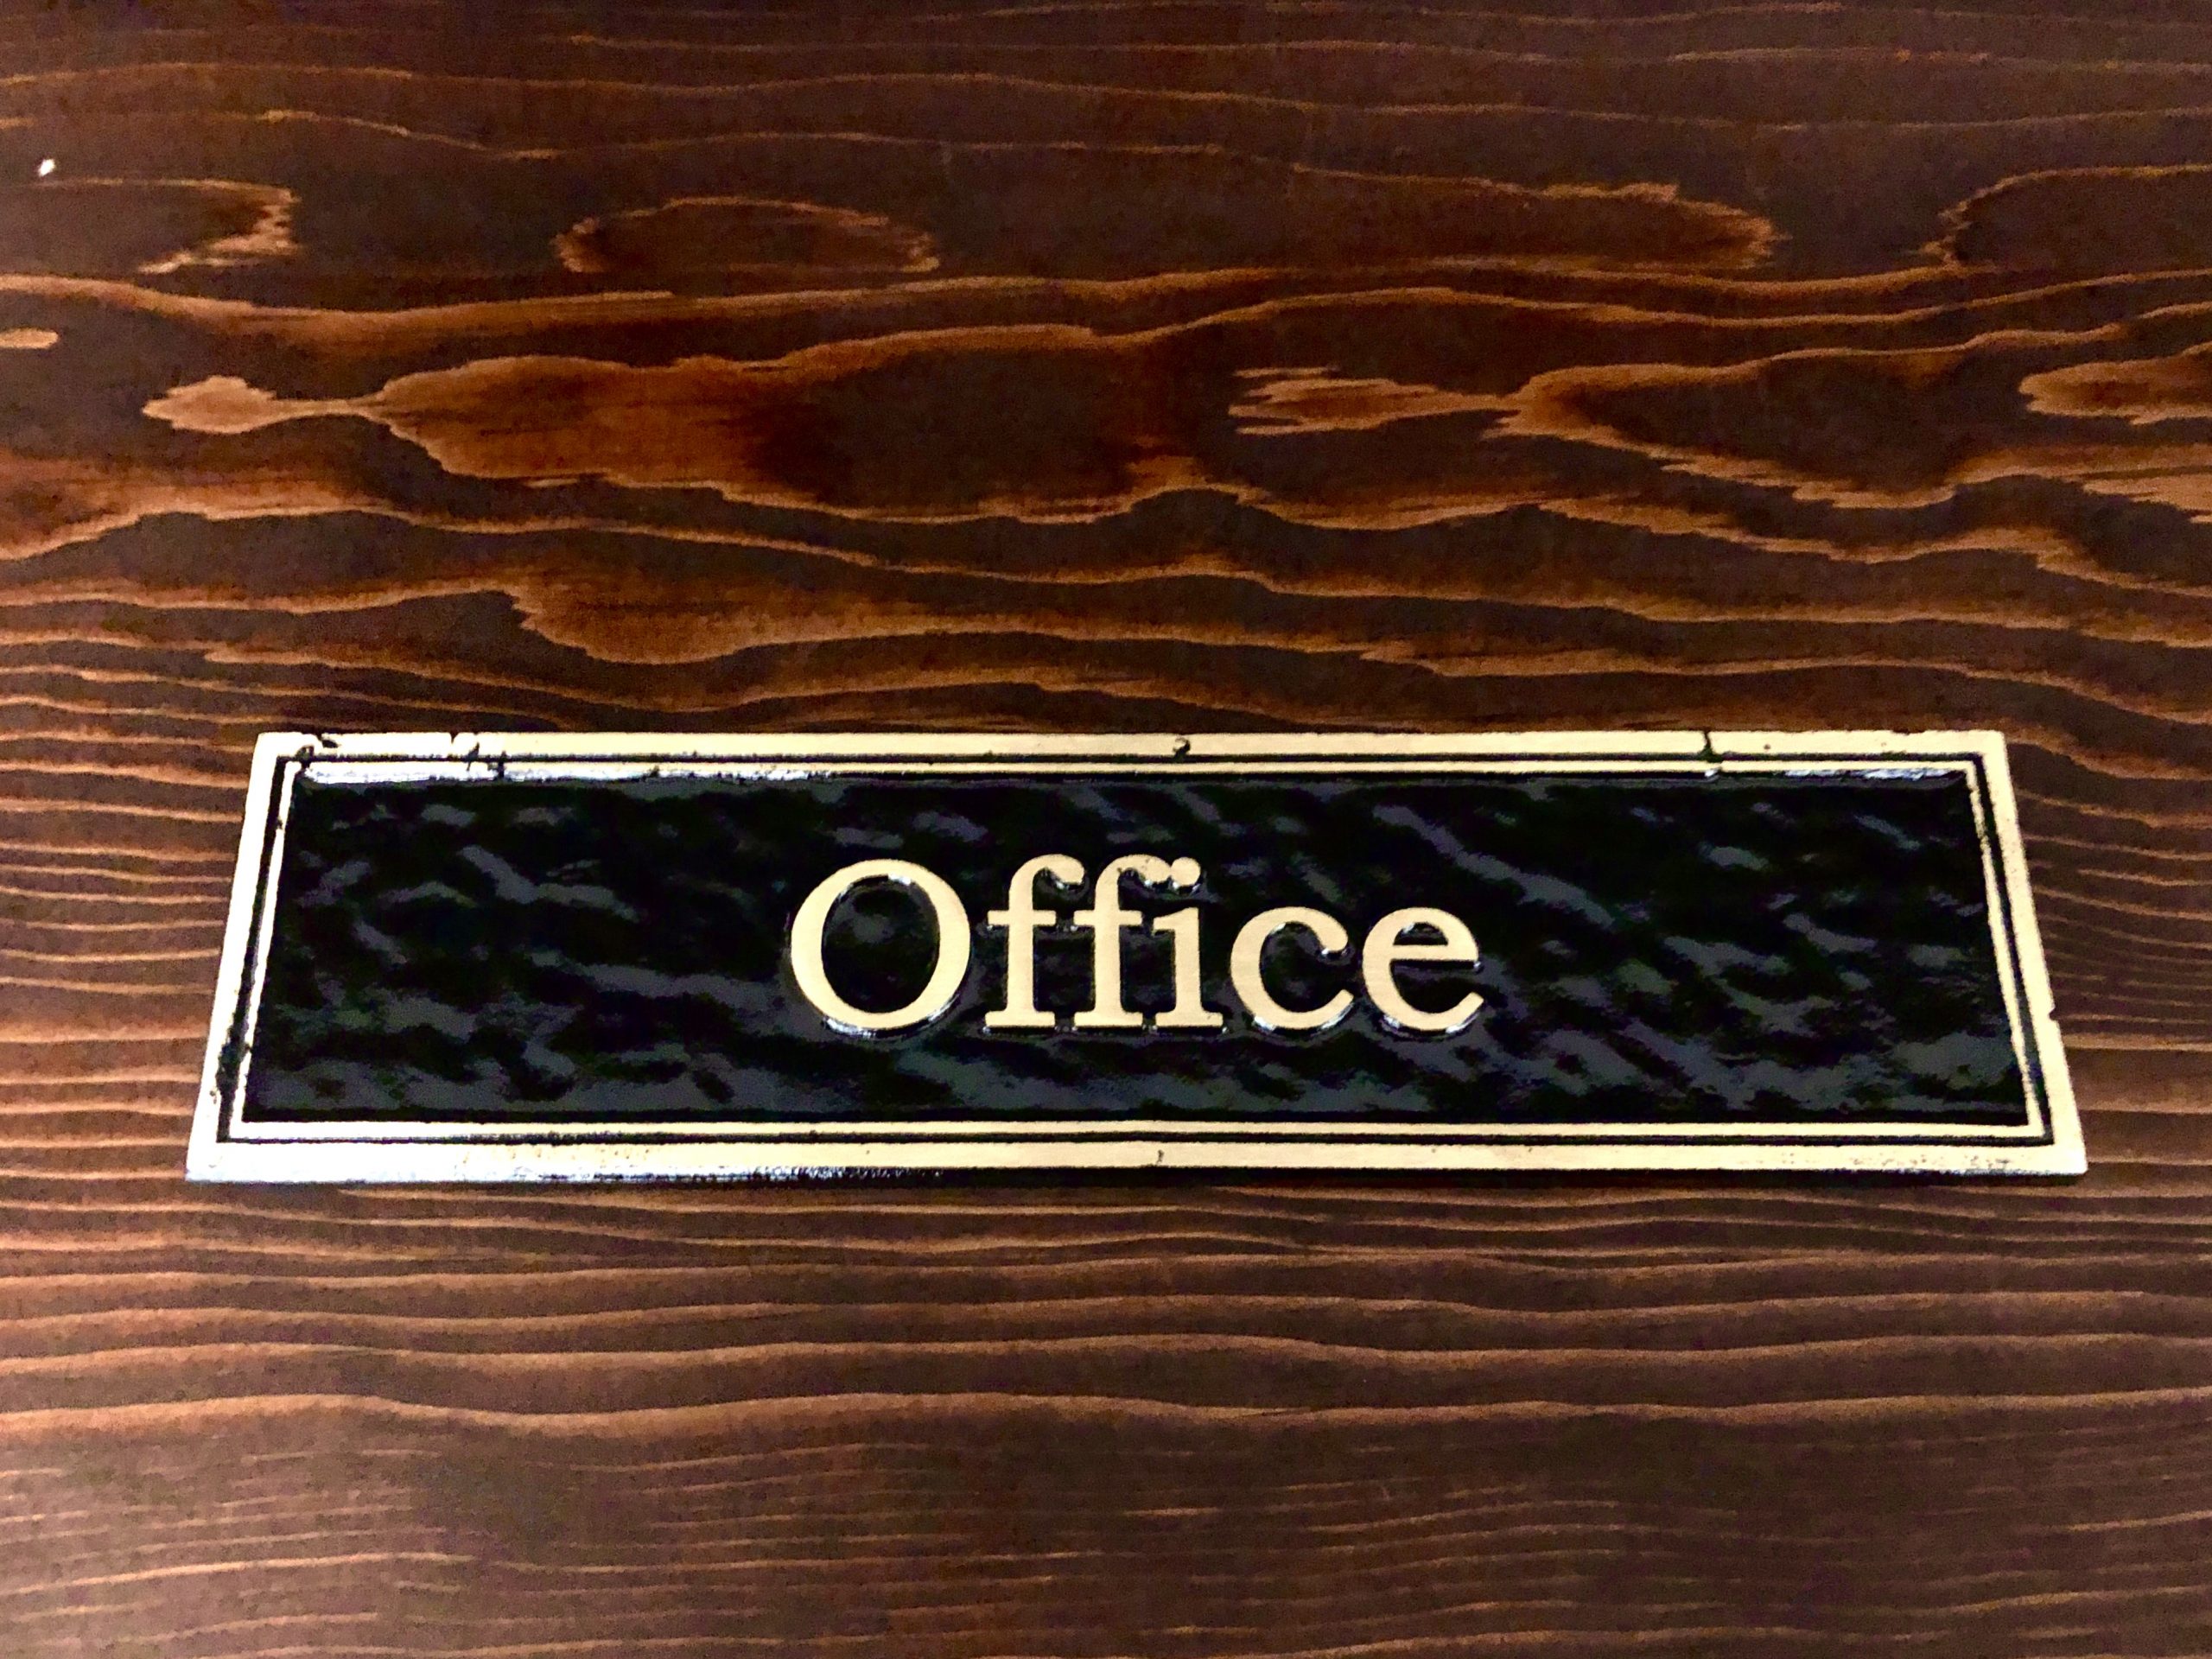 12 x 2 Executive Office Nameplate Signs - Engraved Brass